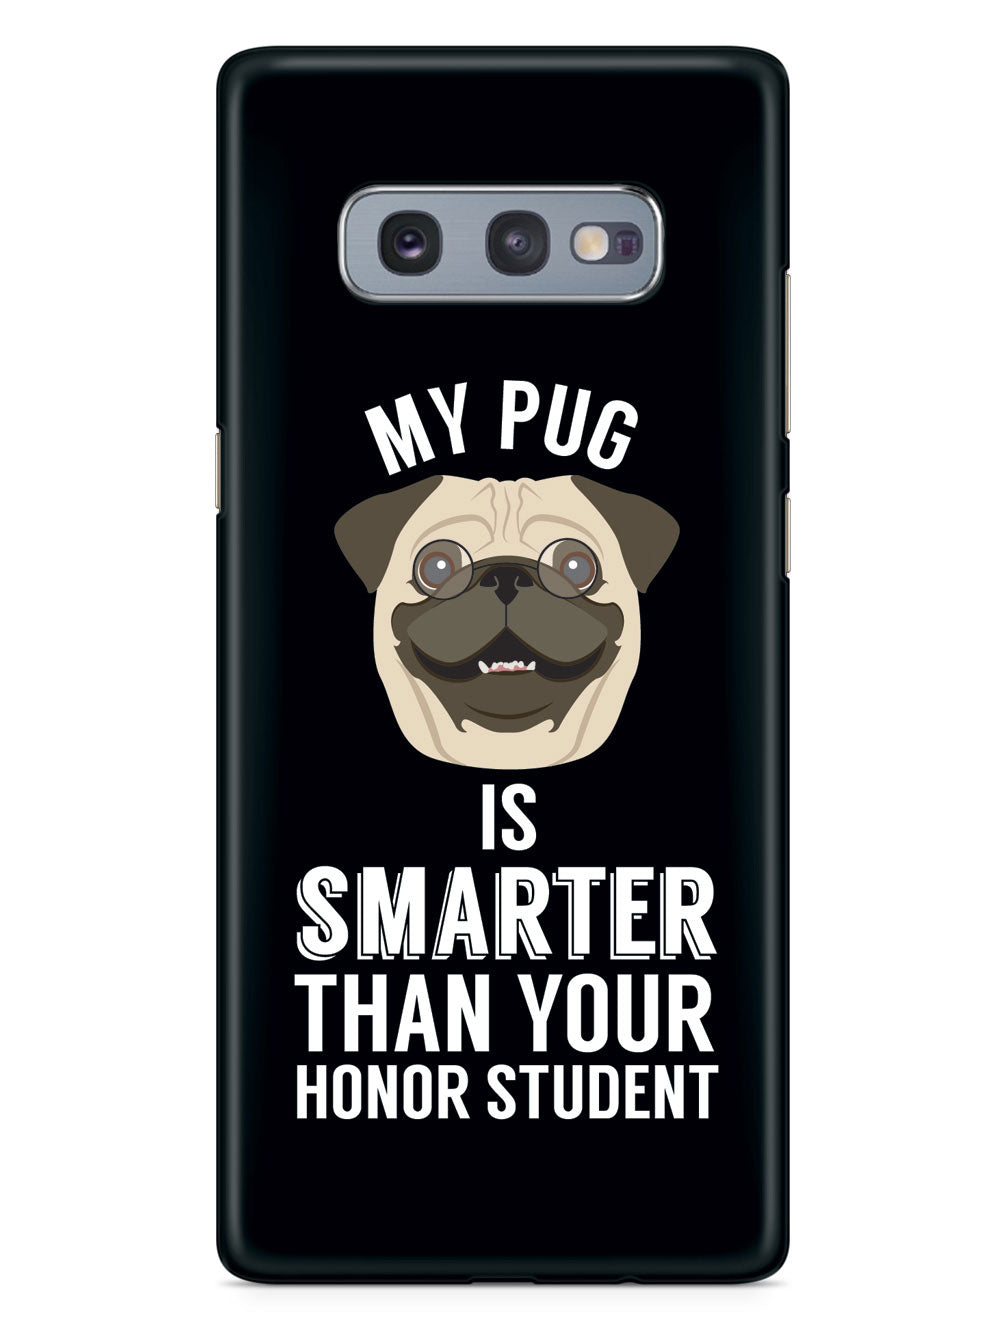 Smarter Than Your Honor Student - Pug Case